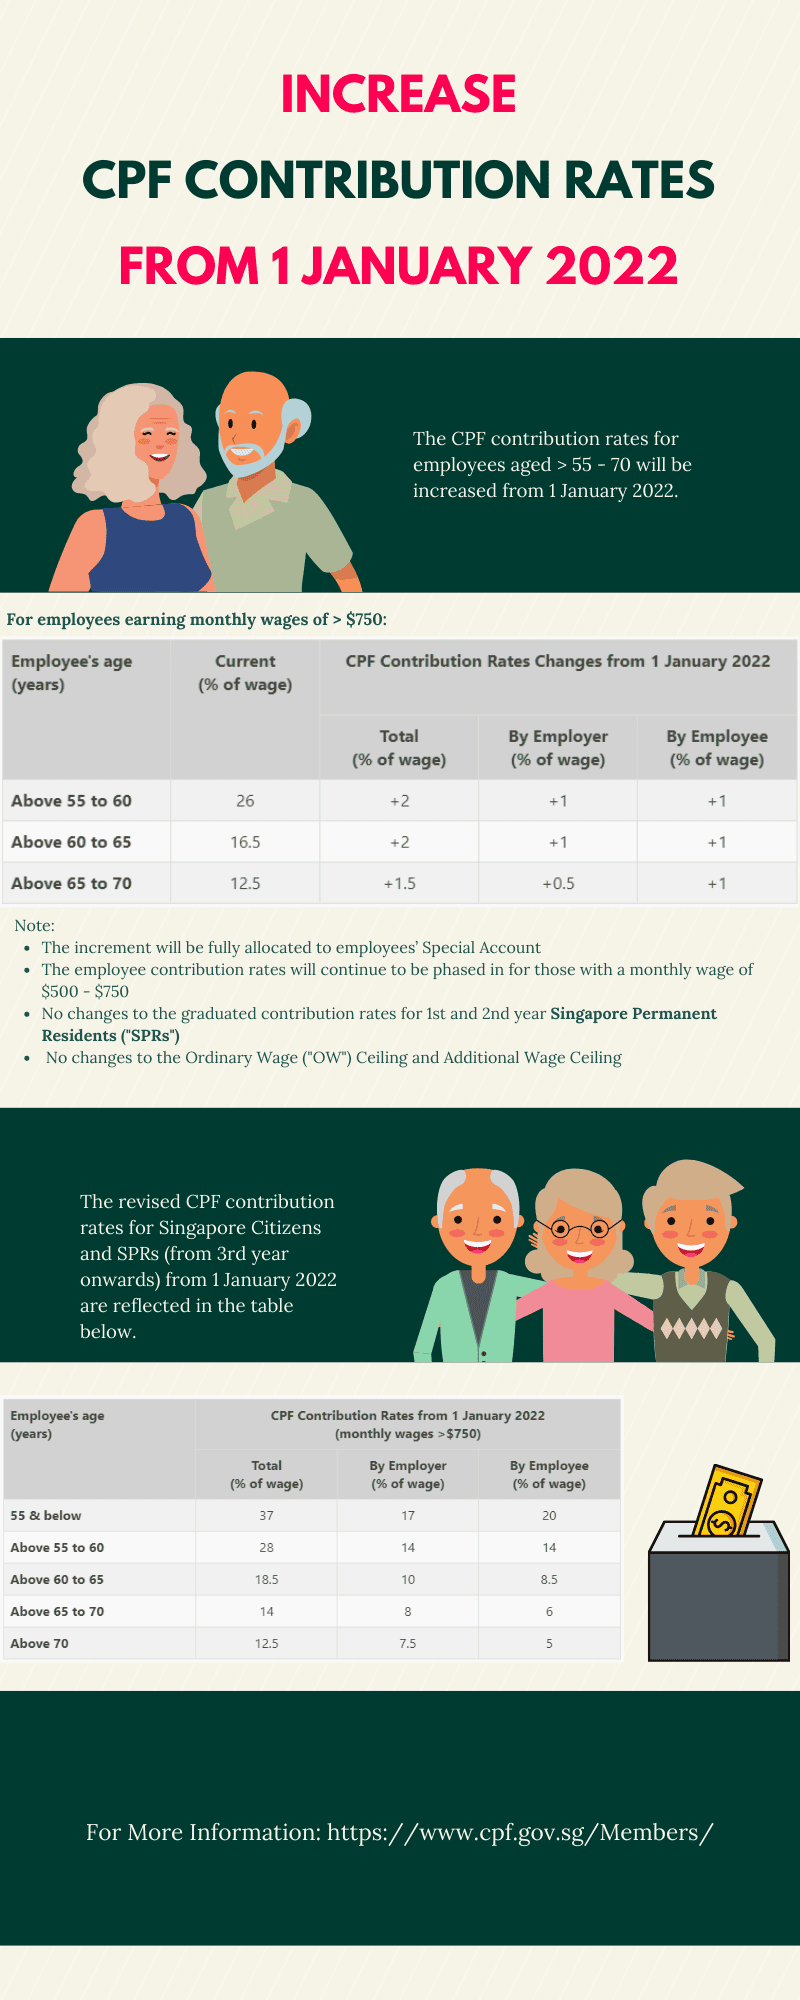 Infographic illustrating the details of the Increase in CPF Contribution Rates from 1 January 2022